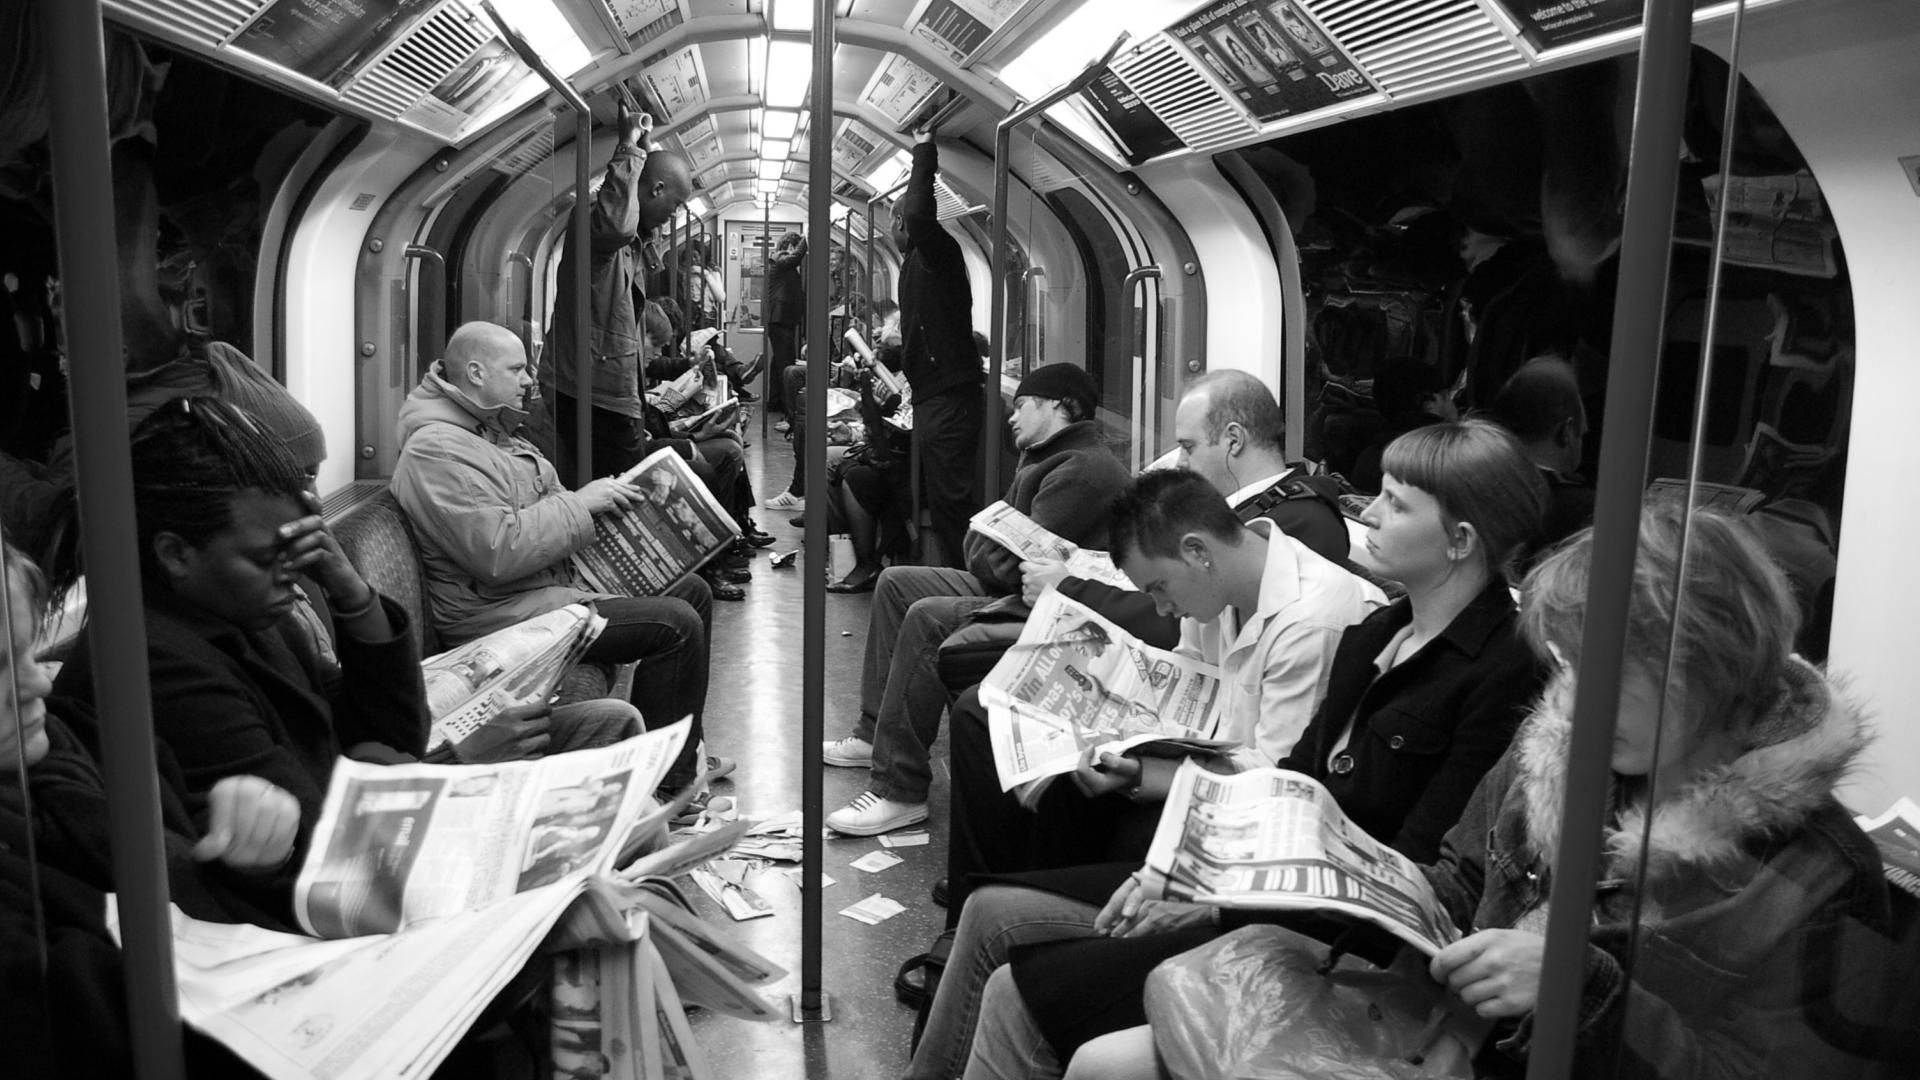 People reading newspapers on the London underground